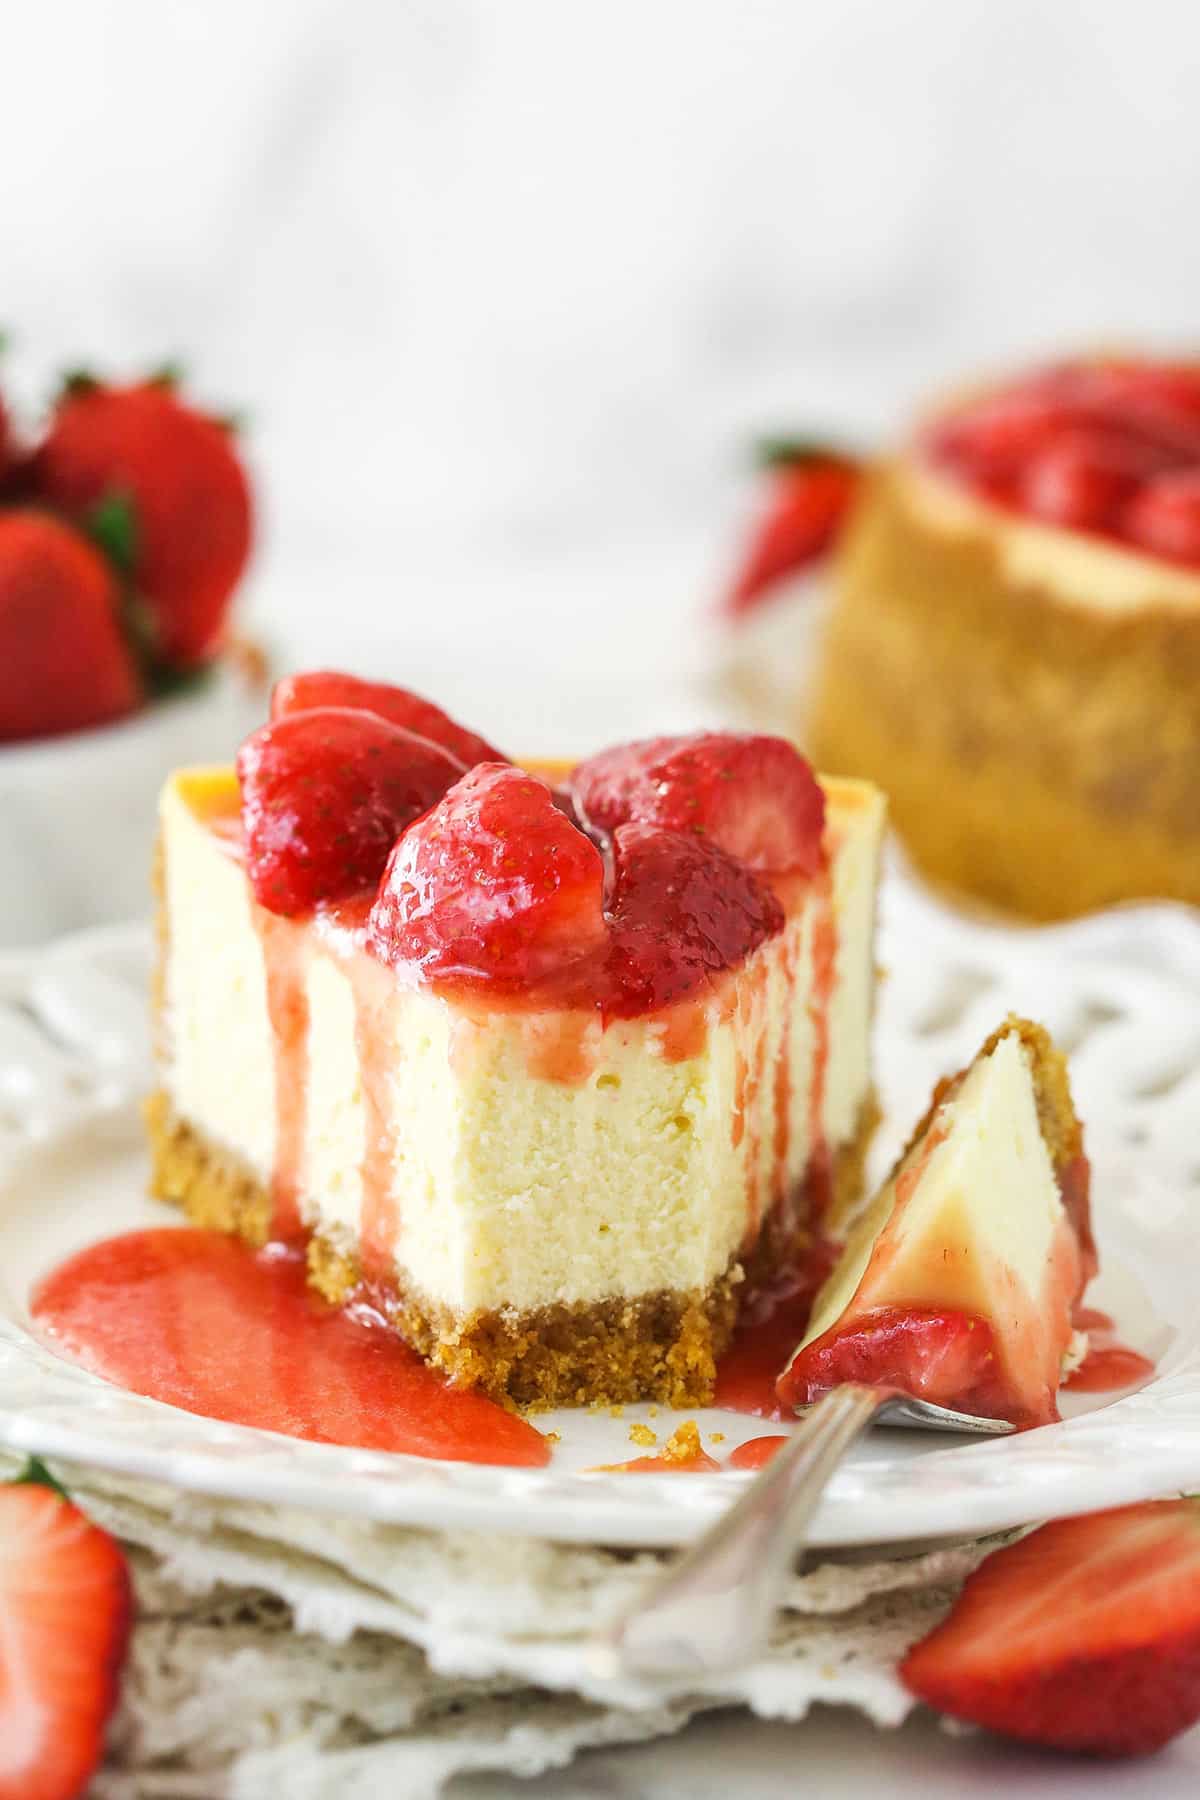 A slice of strawberry cheesecake on a plate with a bite taken out of it.